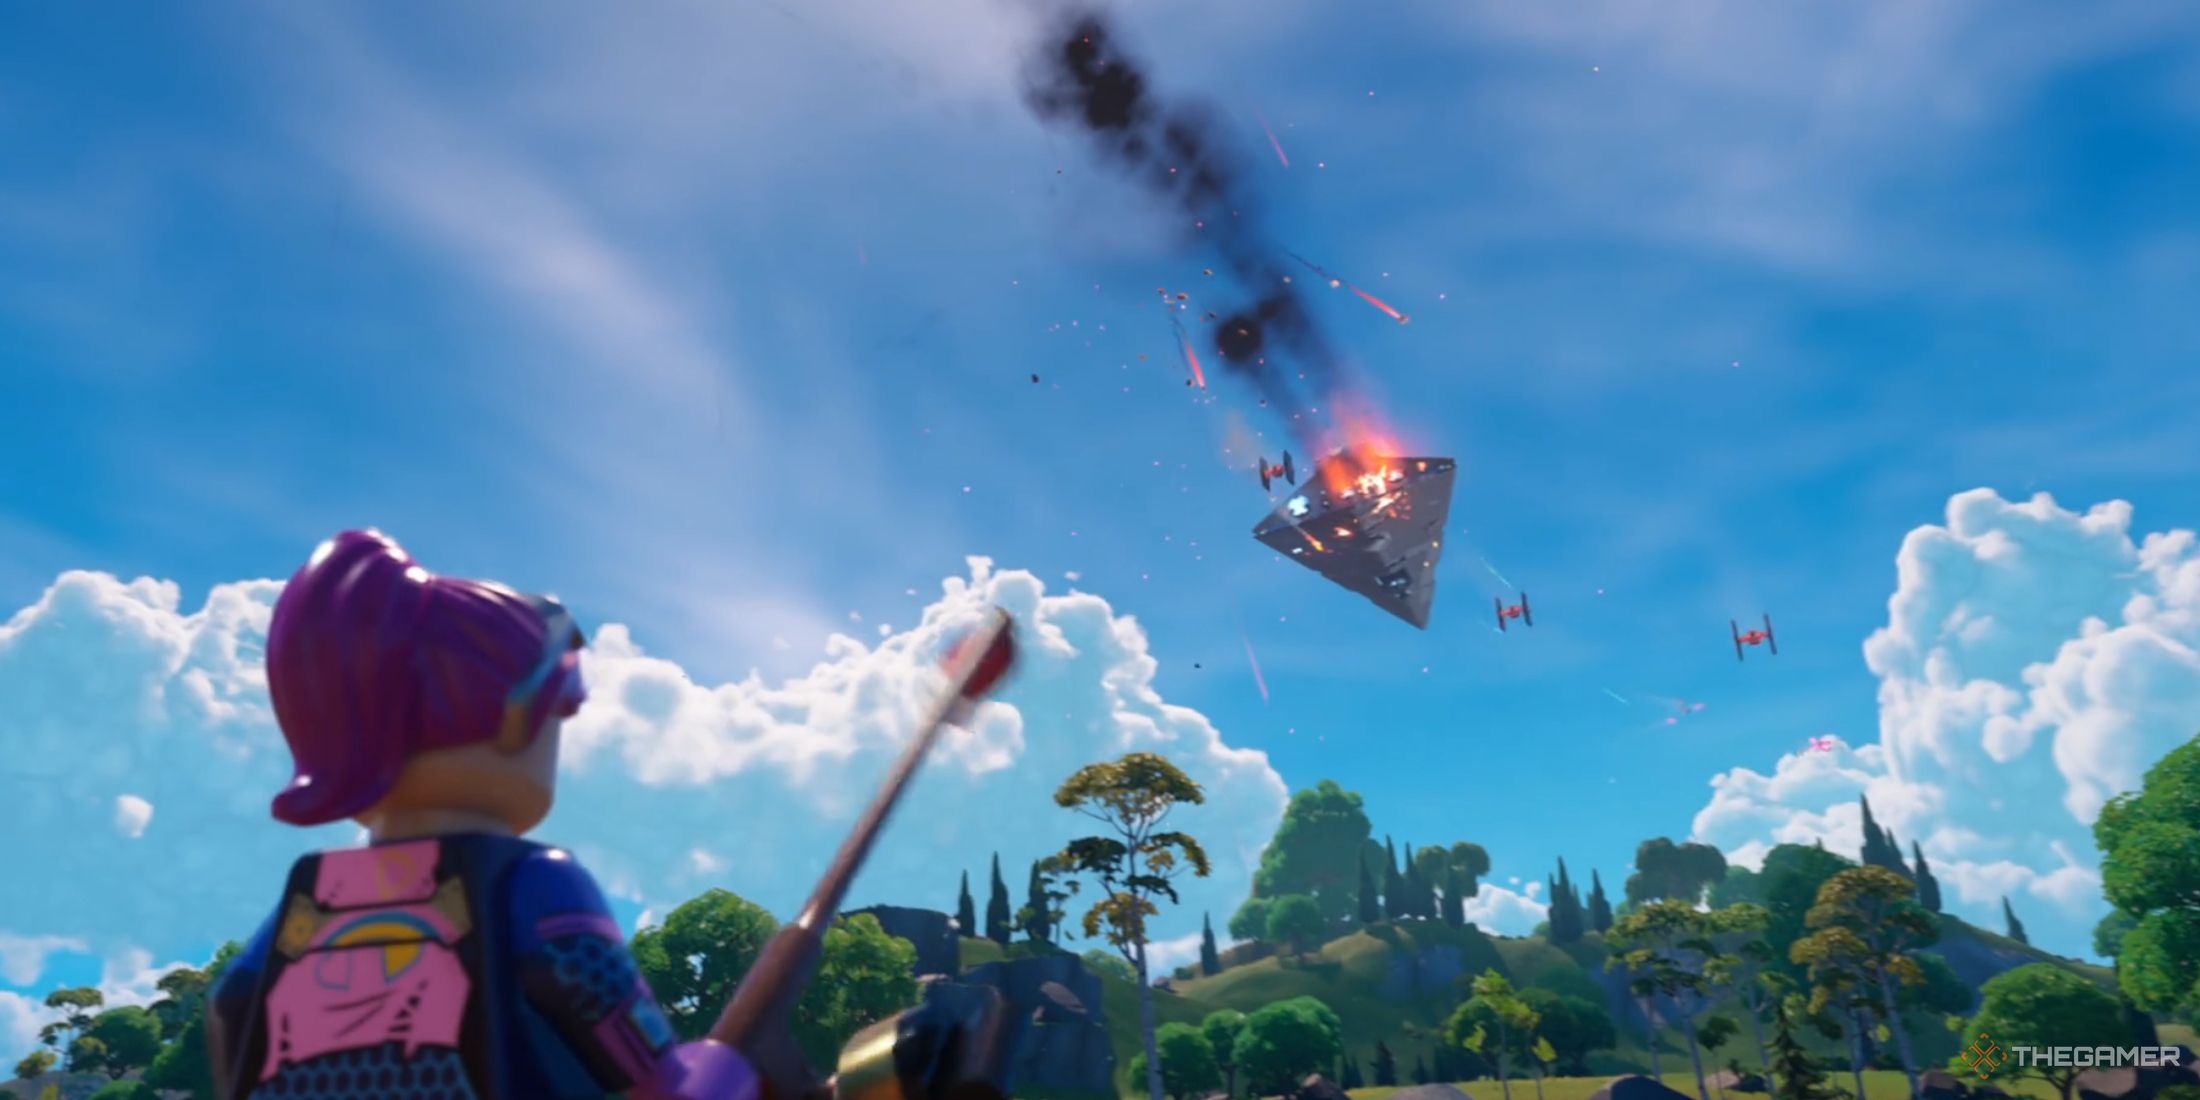 A screenshot from Lego Fortnite showing a ship crashing from the sky onto the player's island. Lego Bright Bomber can be seen in the foreground, holding a fishing pole and looking up at the falling ship.